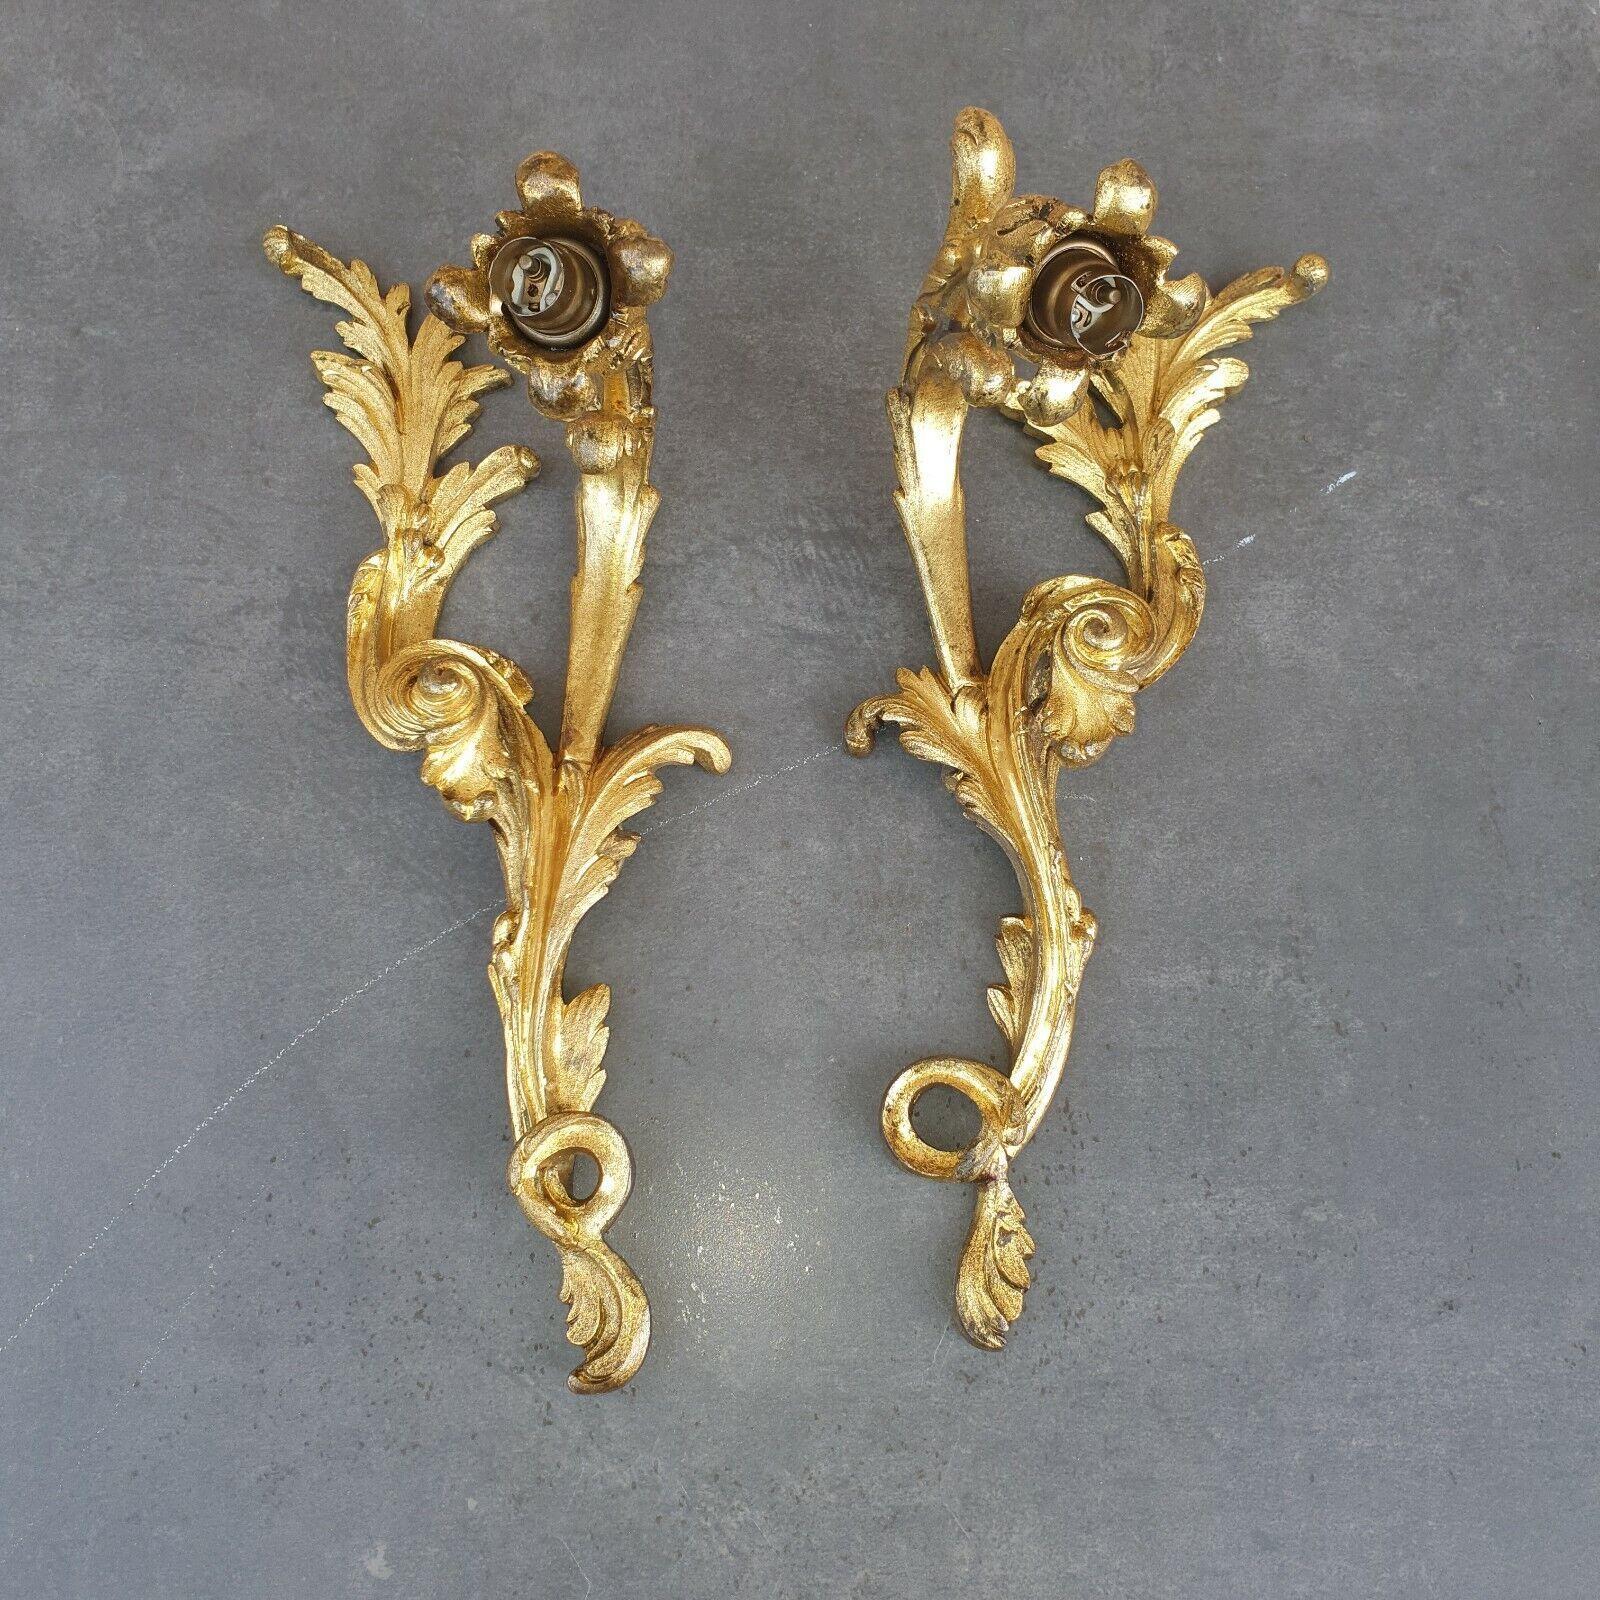 Pair 19thc French Extra High Quality Gilt Dore Bronze Louis XV style Rococo Wall Sconces. Again this is not an ordinary pair of Louis Sconces. This pair is exceptional.